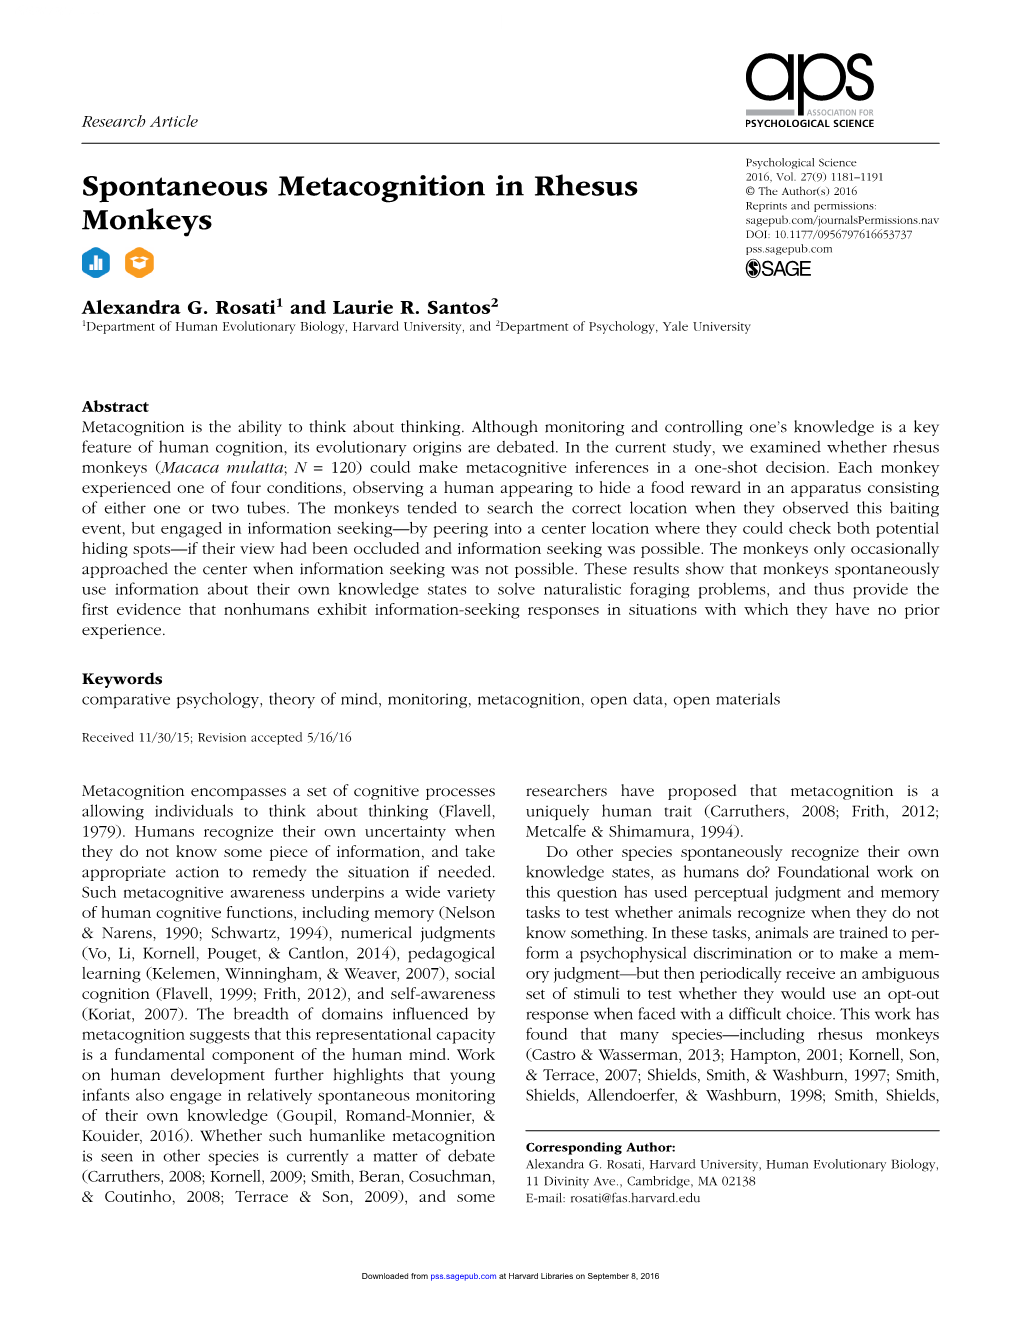 Spontaneous Metacognition in Rhesus Monkeys Research-Article6537372016